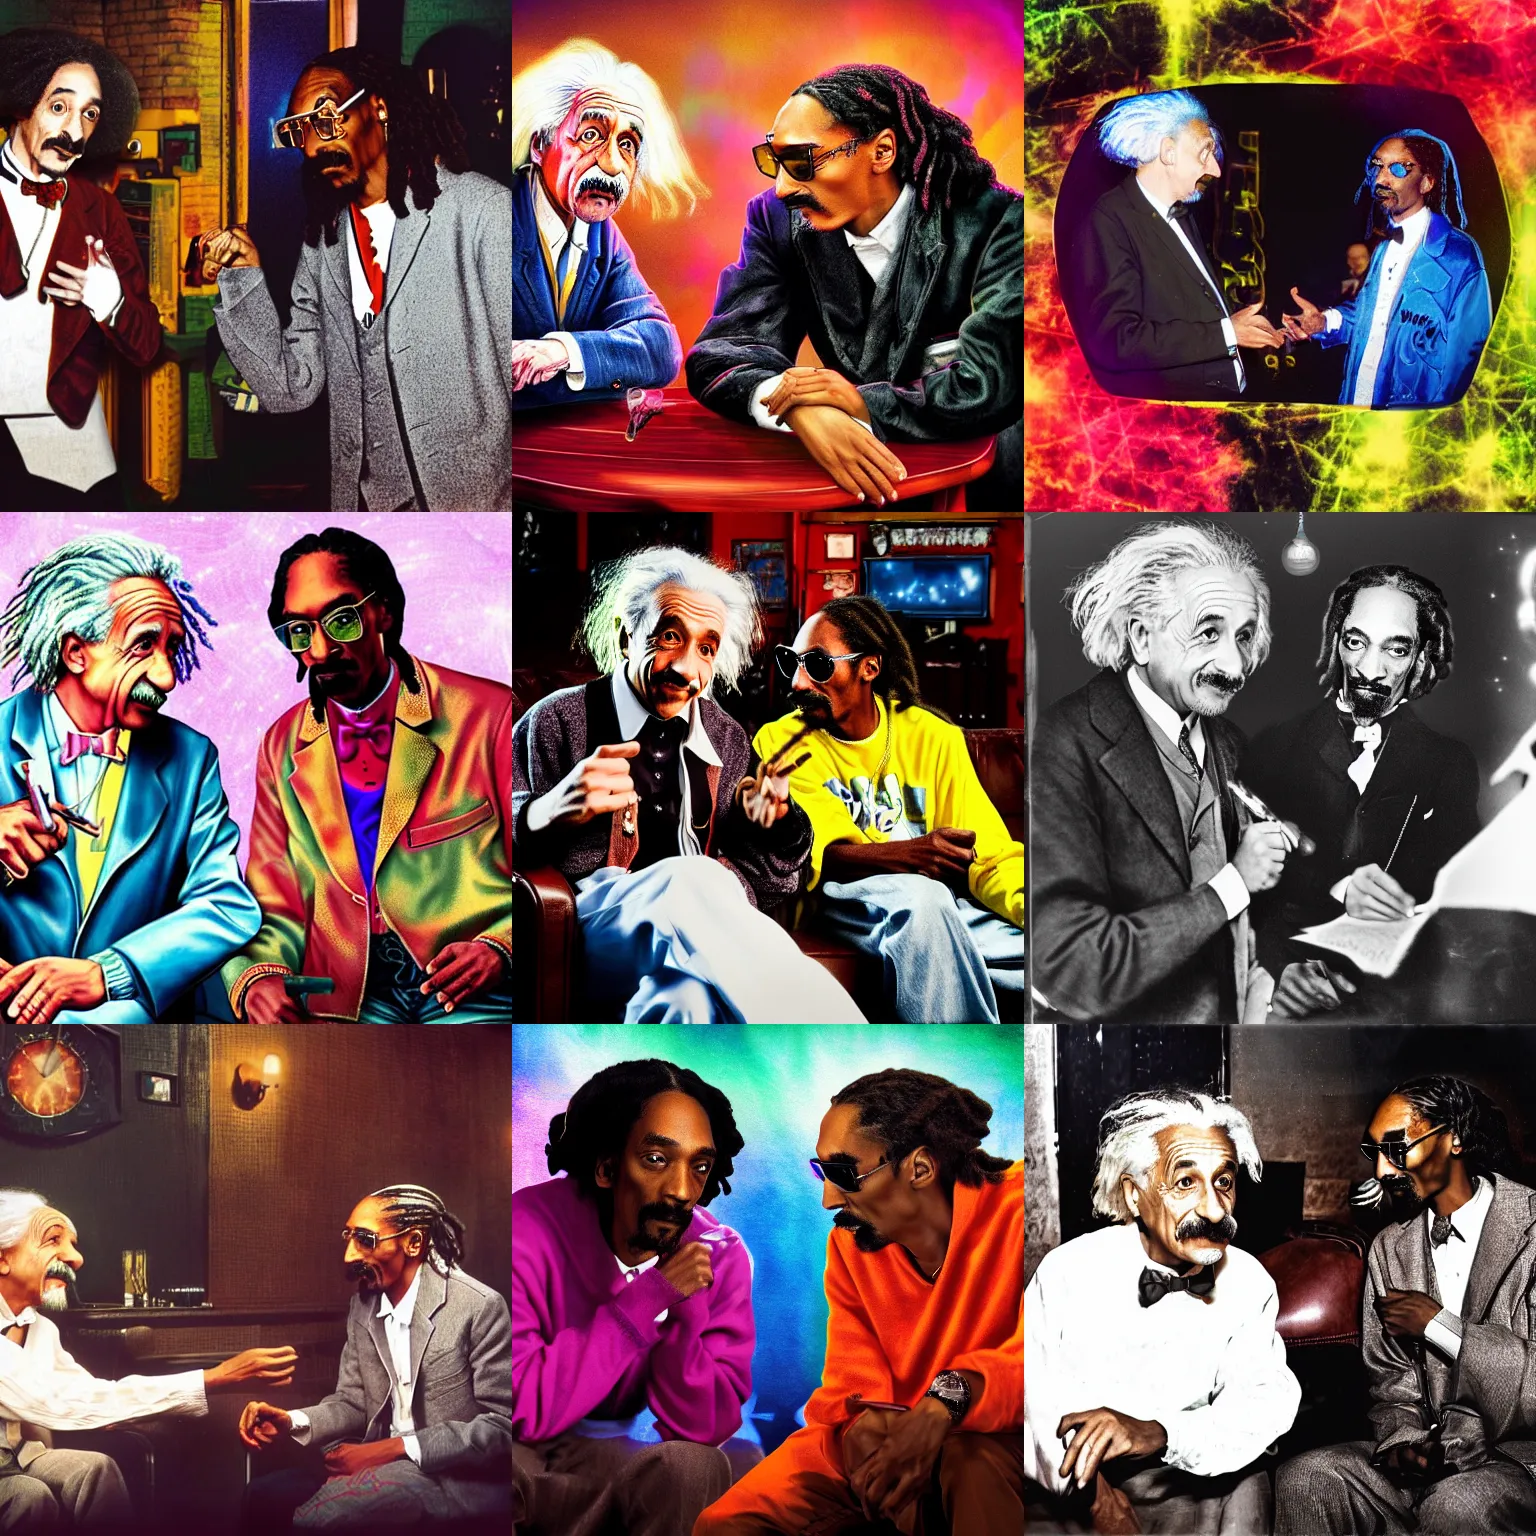 Prompt: potrait Photograph of Albert Einstein and Snoop Dogg discussing theoretical physics ideas in a club club, colorful photograph, 4k, HDR